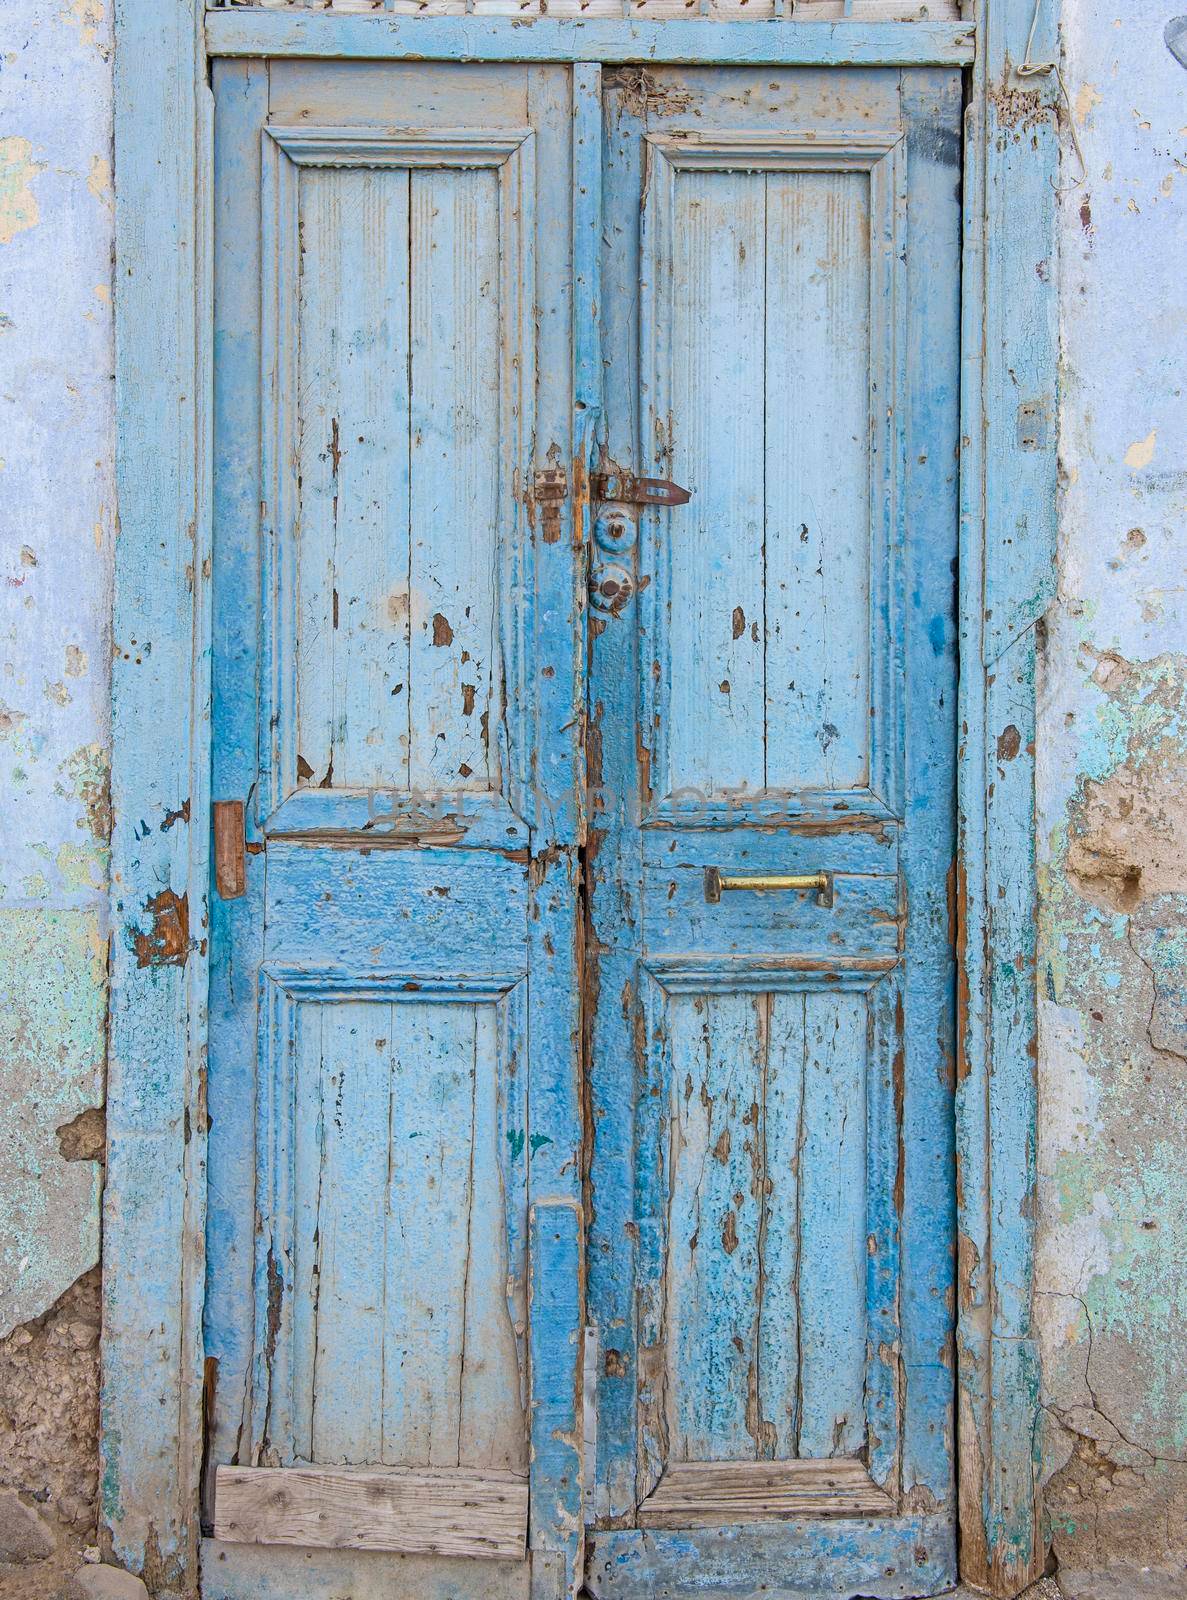 Old rustic wooden door in wall of abandoned traditional egyptian house